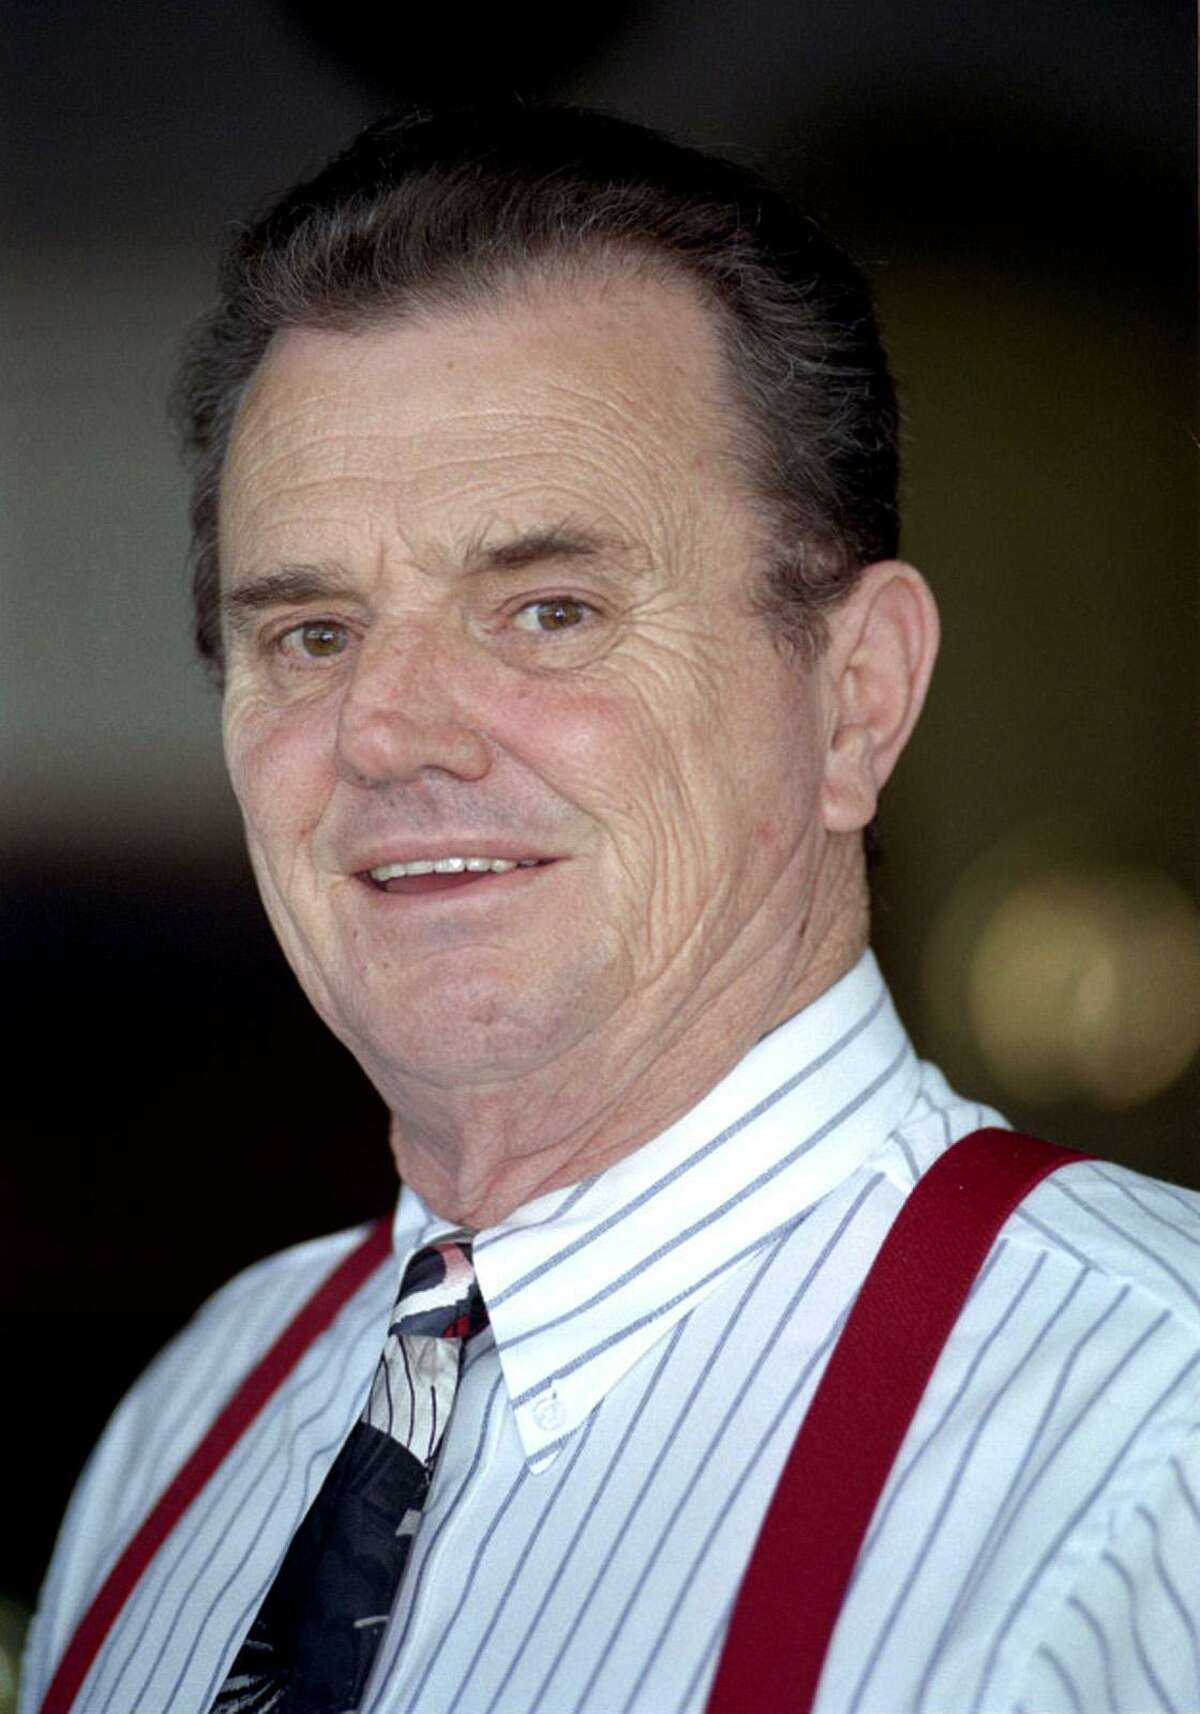 Judge Pat Priest of San Antonio, Texas, poses for a picture Oct. 6, 1995. Priest was selected to preside over Rep. Tom DeLay's conspiracy and money laundering trial Thursday, Nov. 3, 2005, after another judge became the second to step away from involvement in the case because of political contributions he has made. (AP Photo/San Antonio Express-News, Edward A. Ornelas) ** MAGS OUT NO SALES **